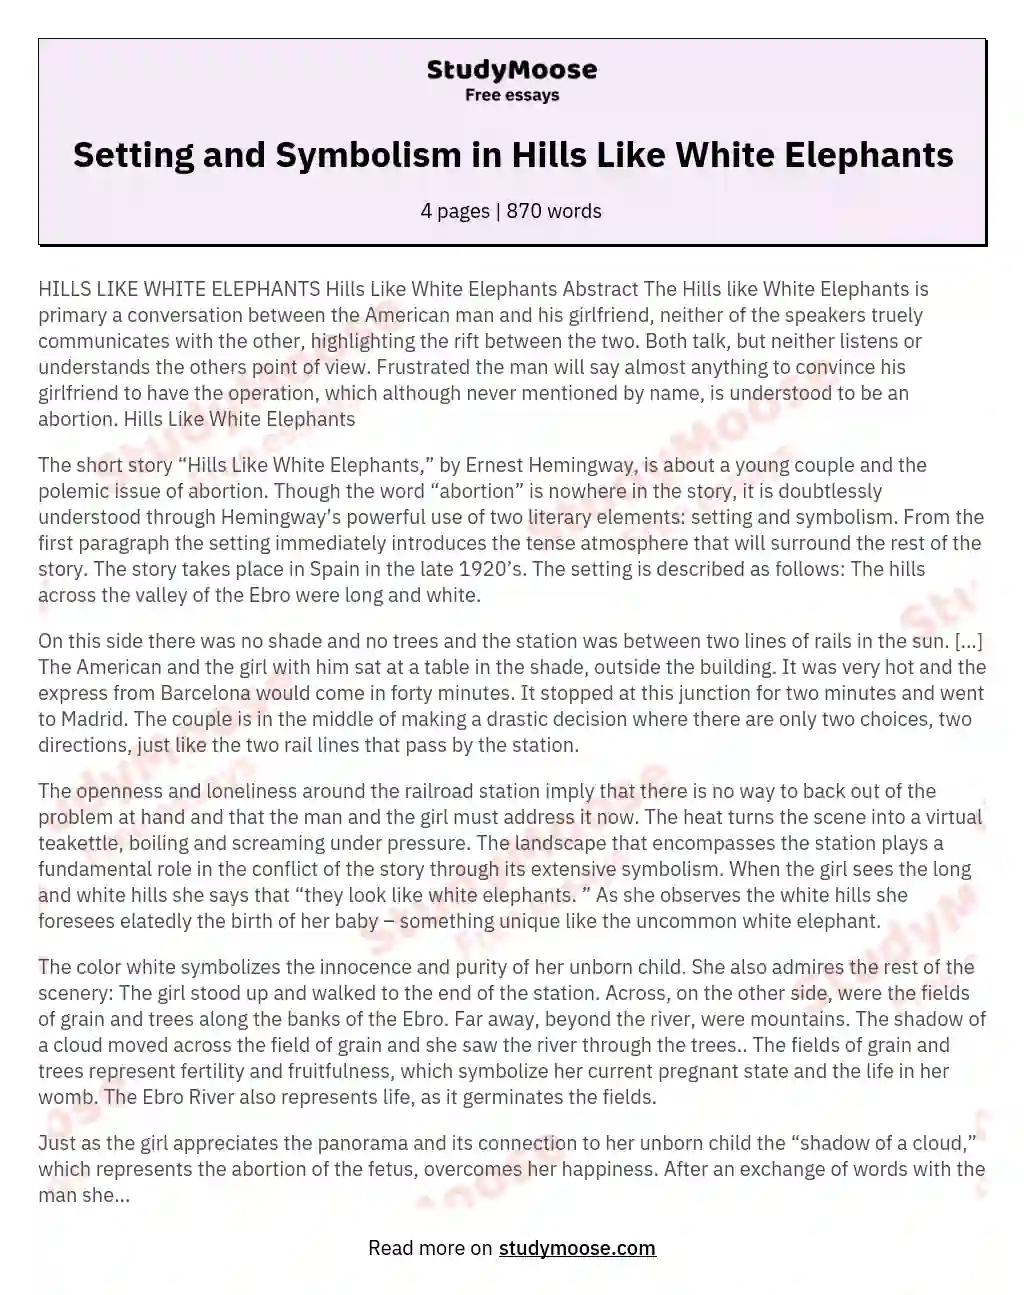 Setting and Symbolism in Hills Like White Elephants